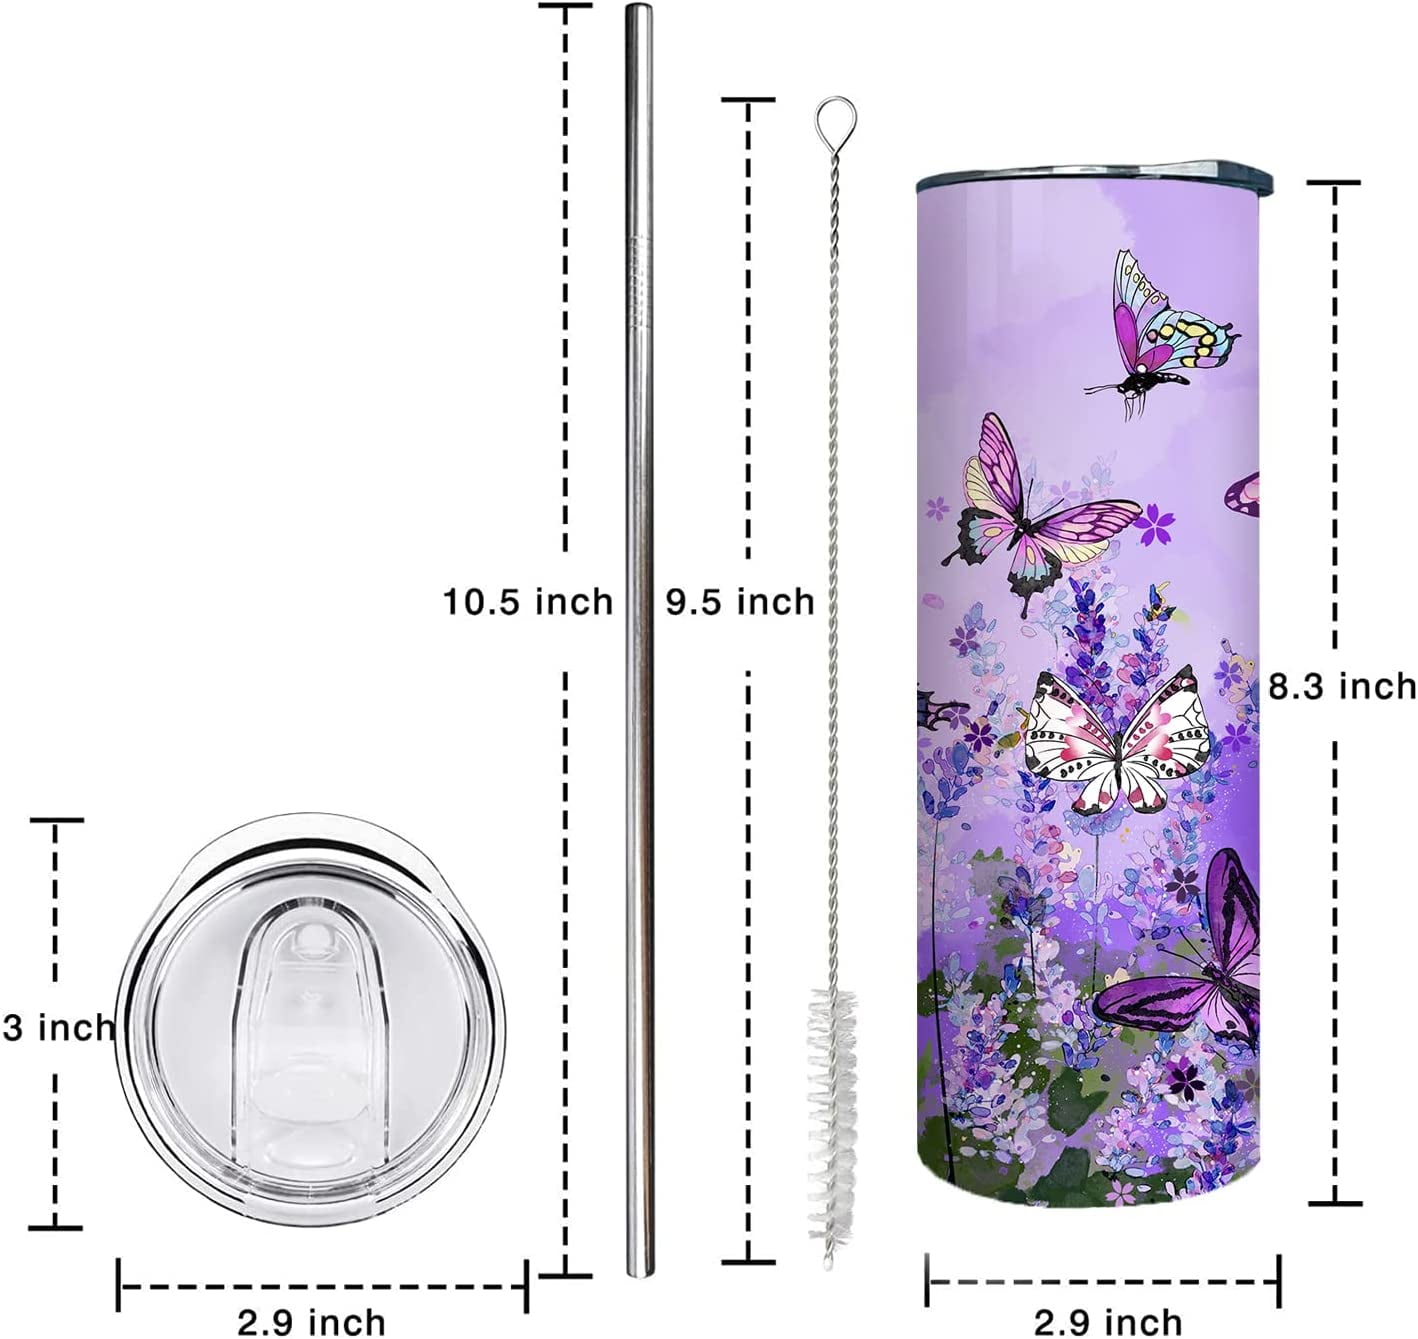 Personalized Sweet 19 Gifts For Girls Daughter Tumbler Stainless Steel Cup  From Mom Butterfly Sweet Nineteen 19 Year Old Birthday Decorations Travel  Mug 